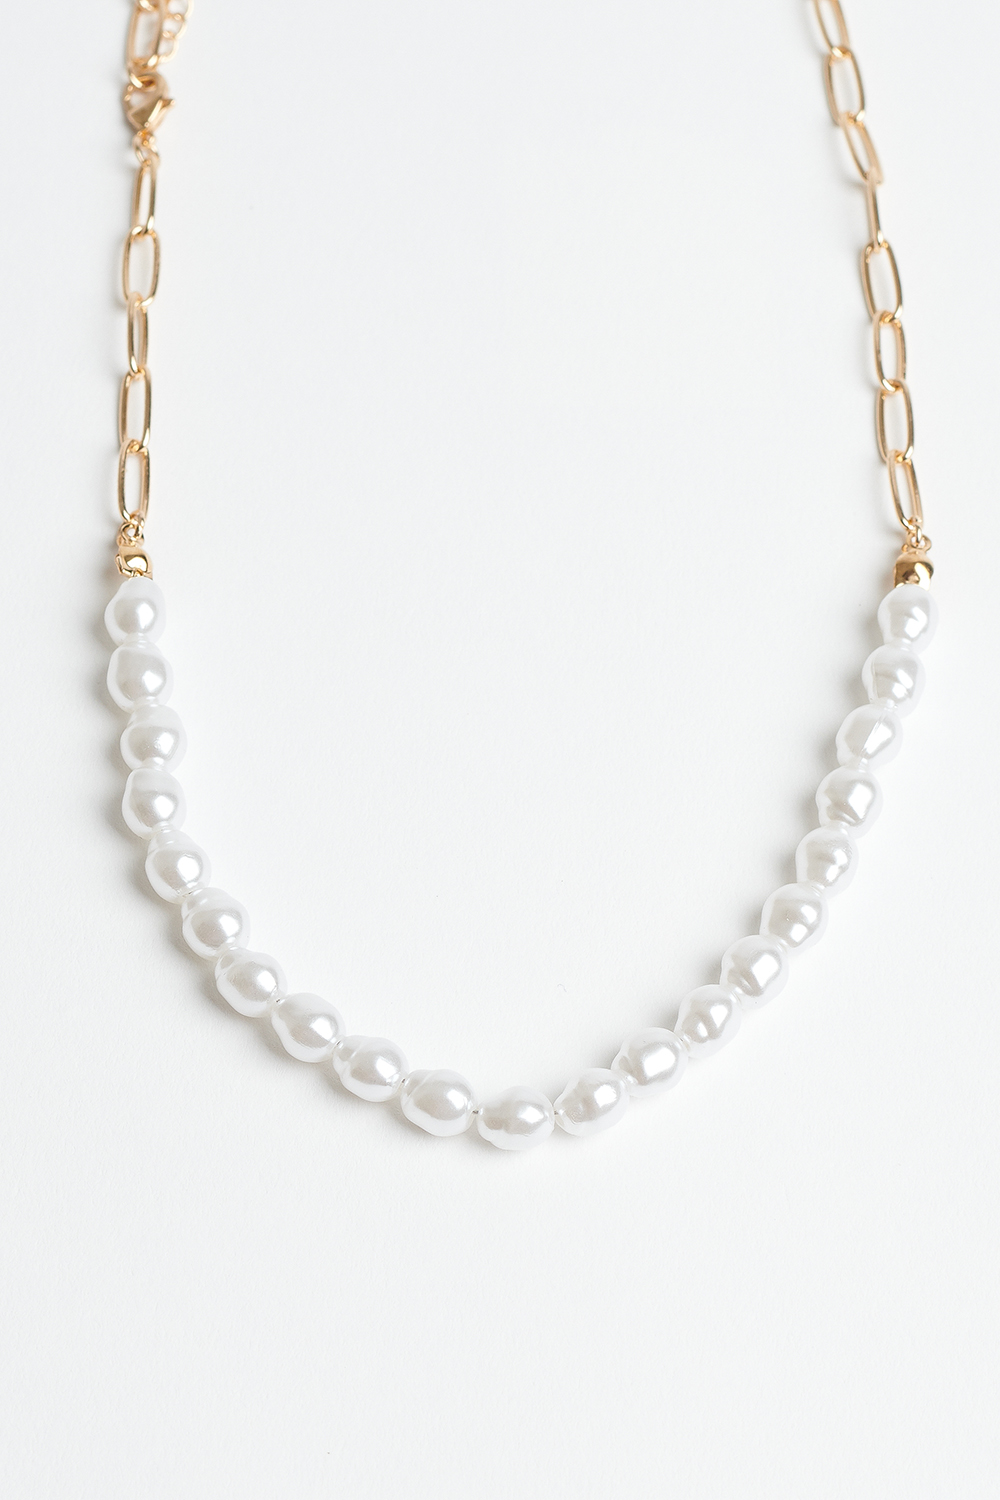 Necklace Gold Half Chain Pearl